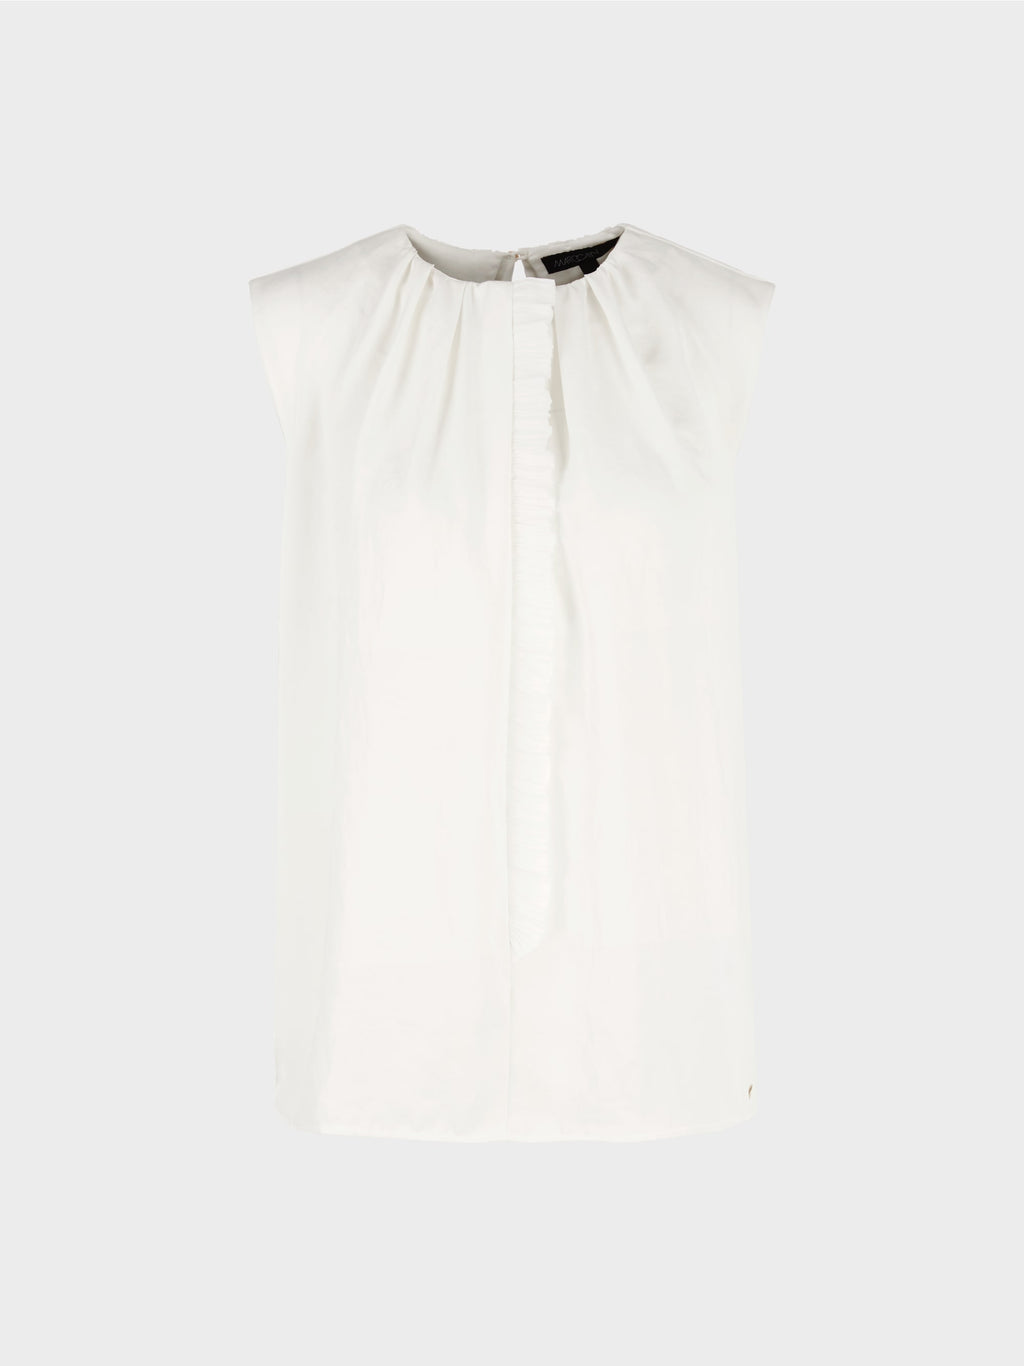 off-white top with ruffle detail